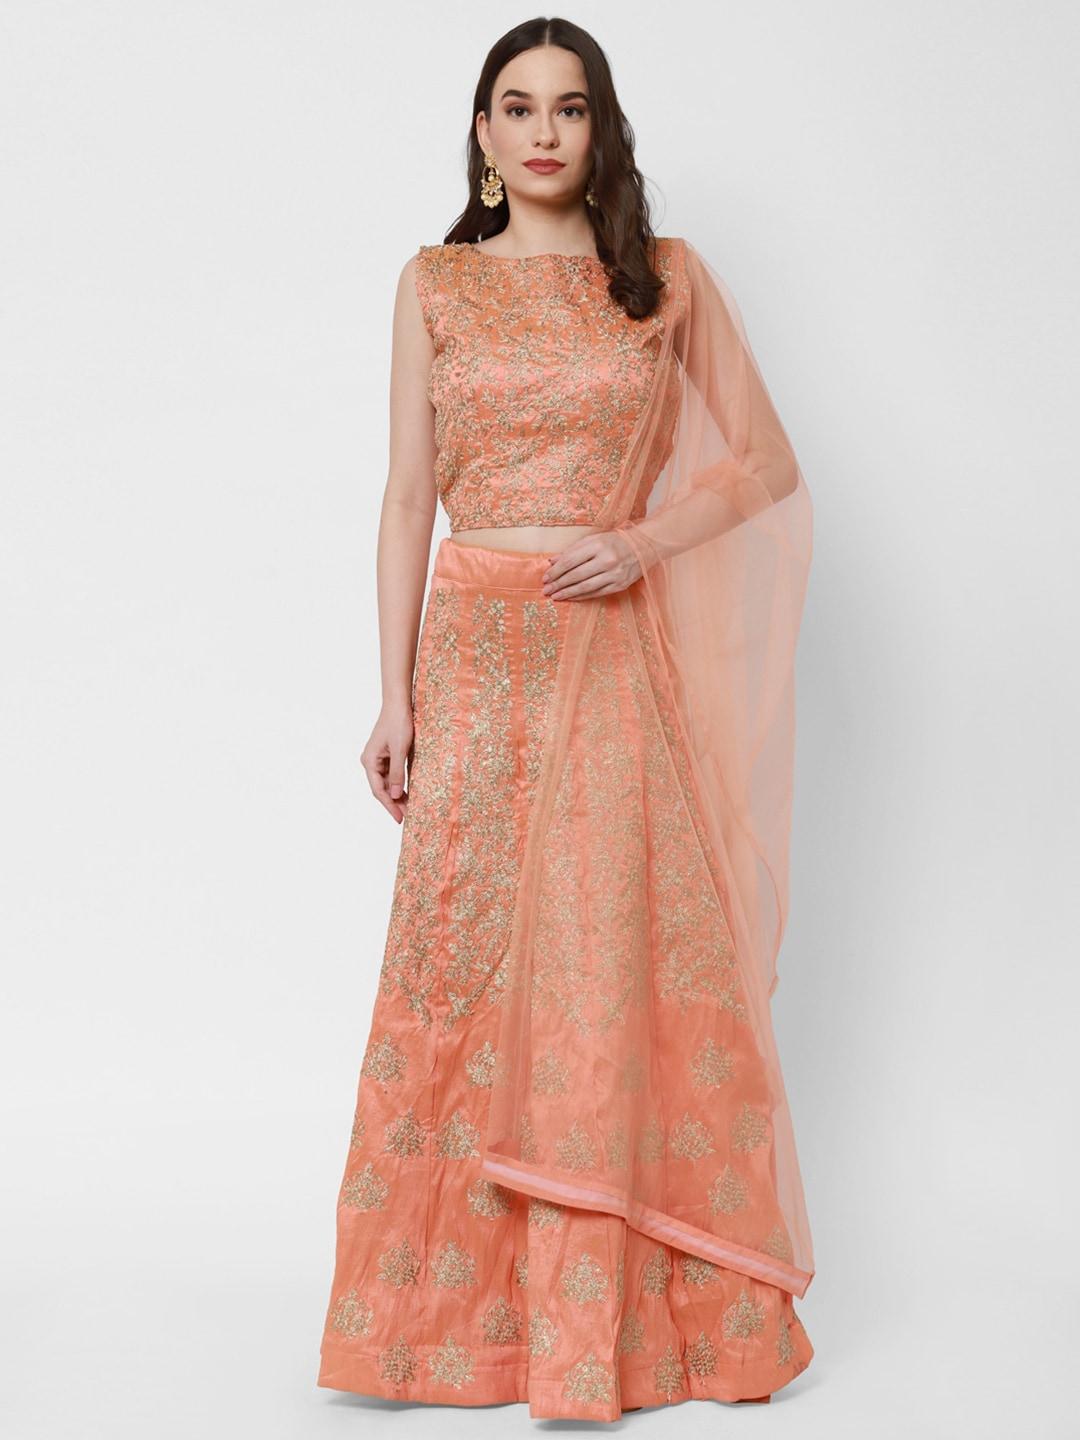 redround peach-coloured & gold-toned embellished semi-stitched lehenga & unstitched blouse with dupatta